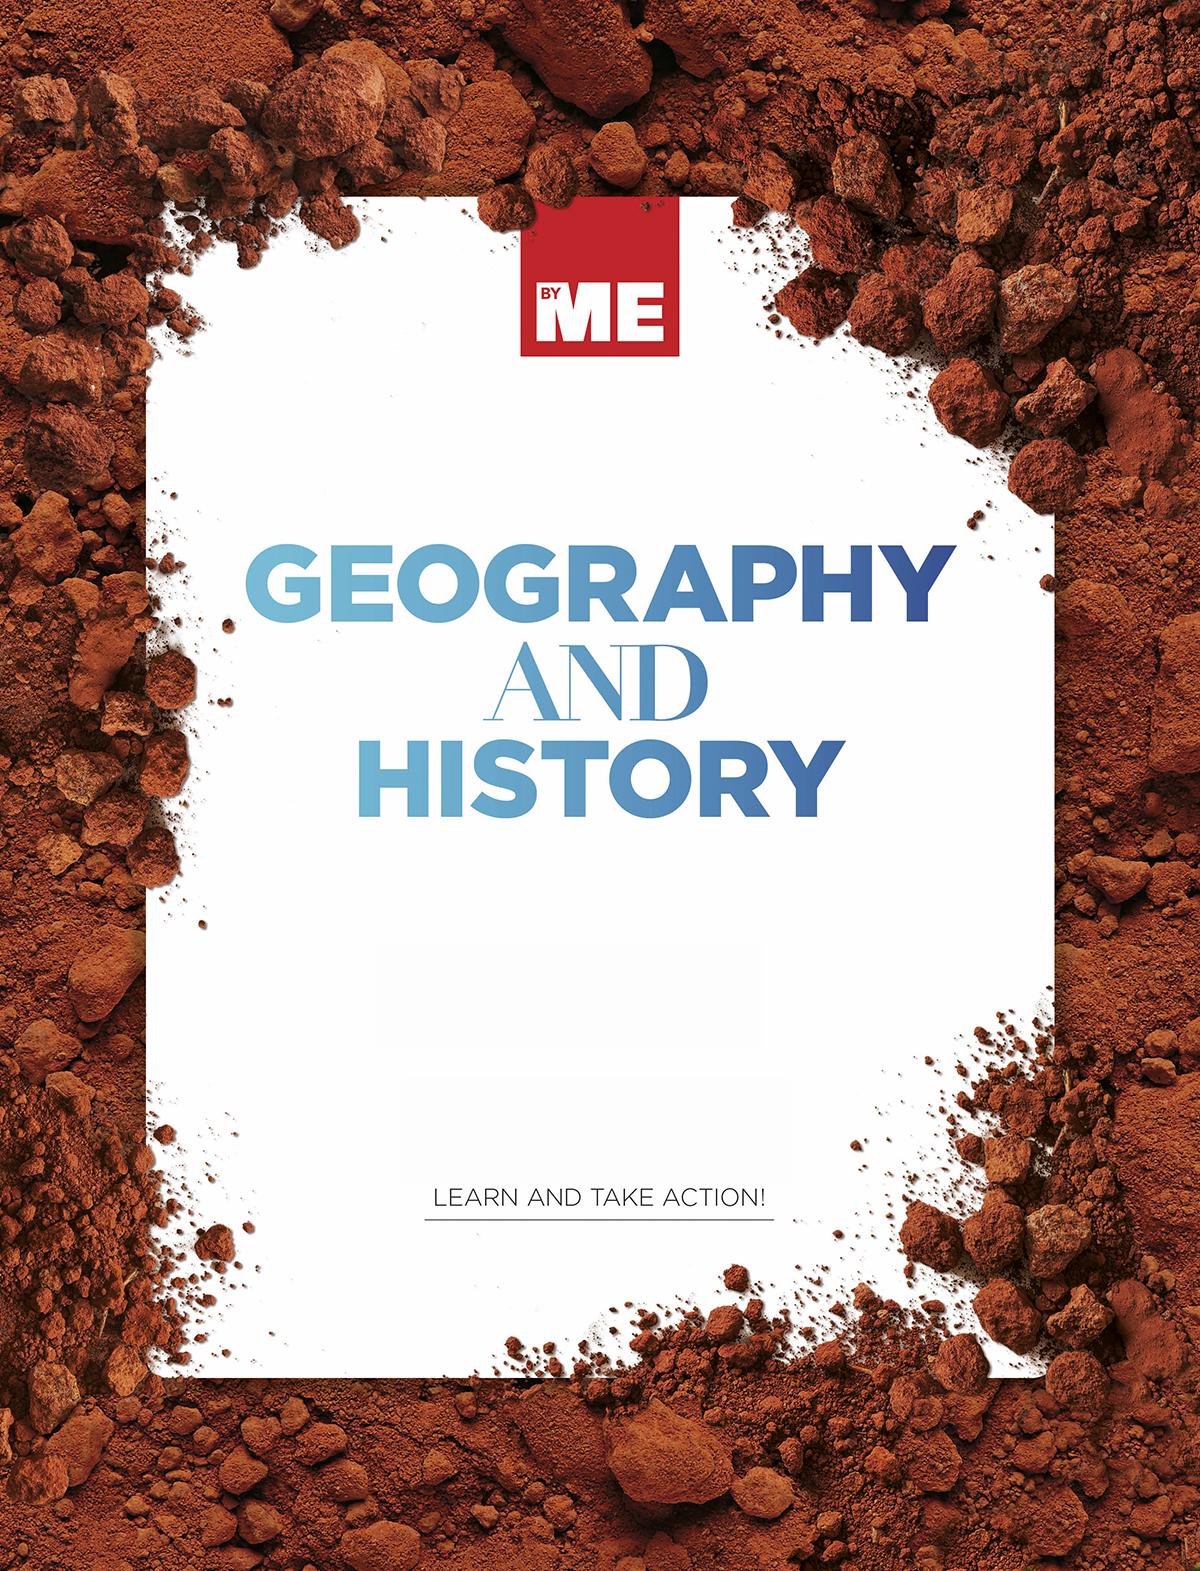 byme. Geography - history